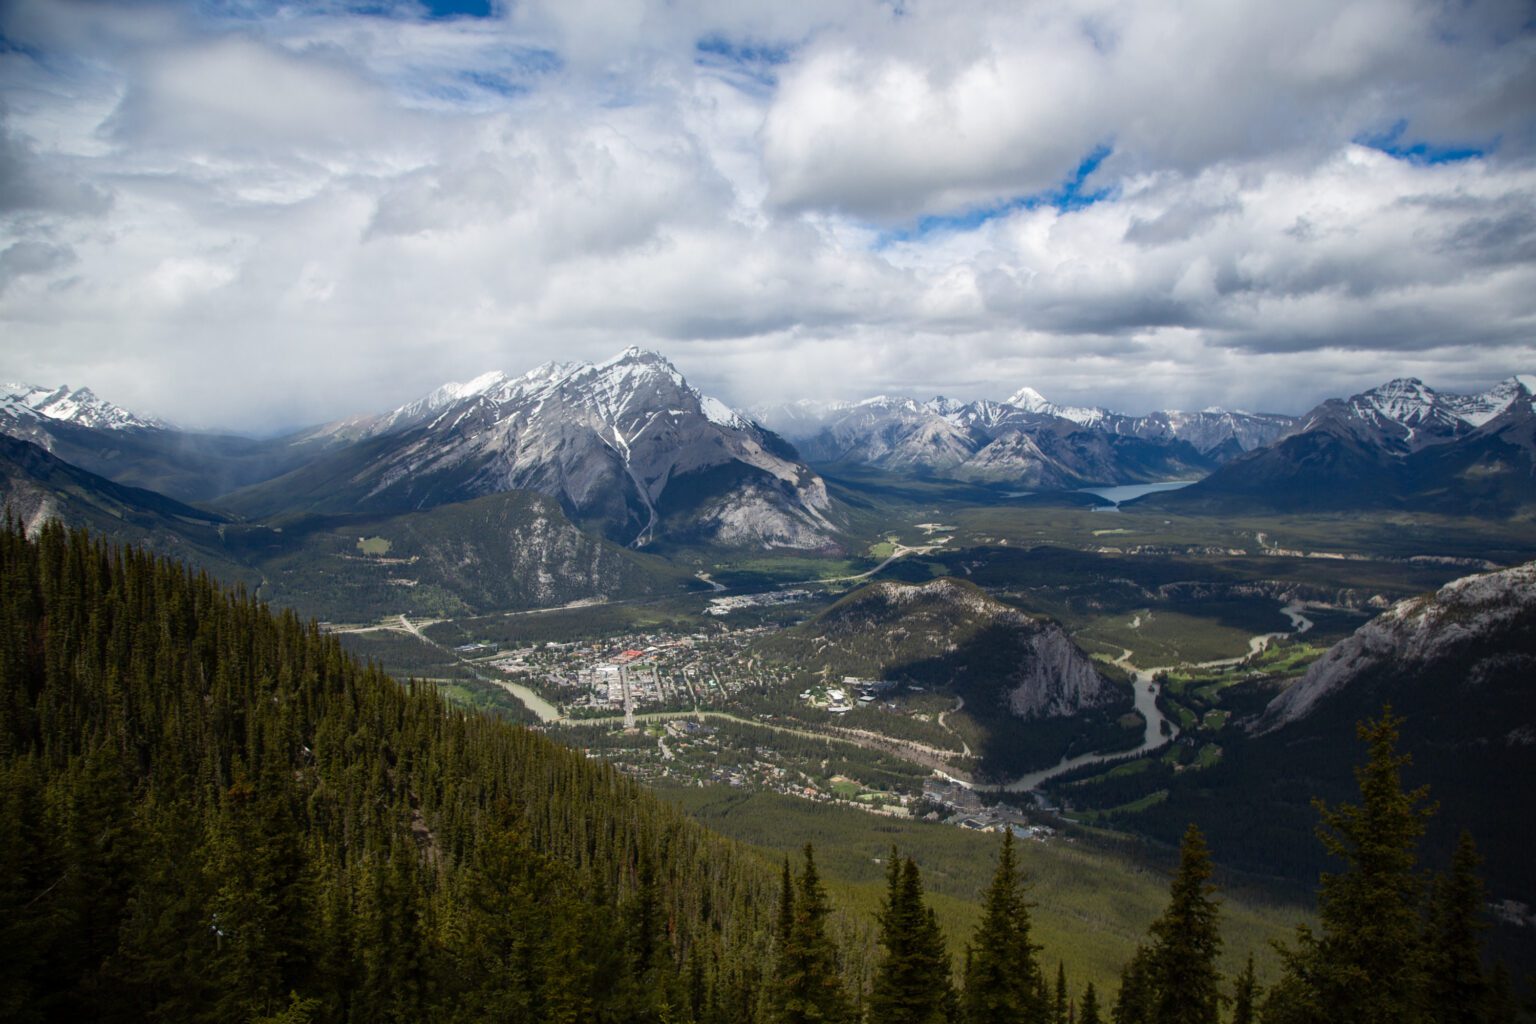 Clouds filter into the Bow River Valley above the town of Banff